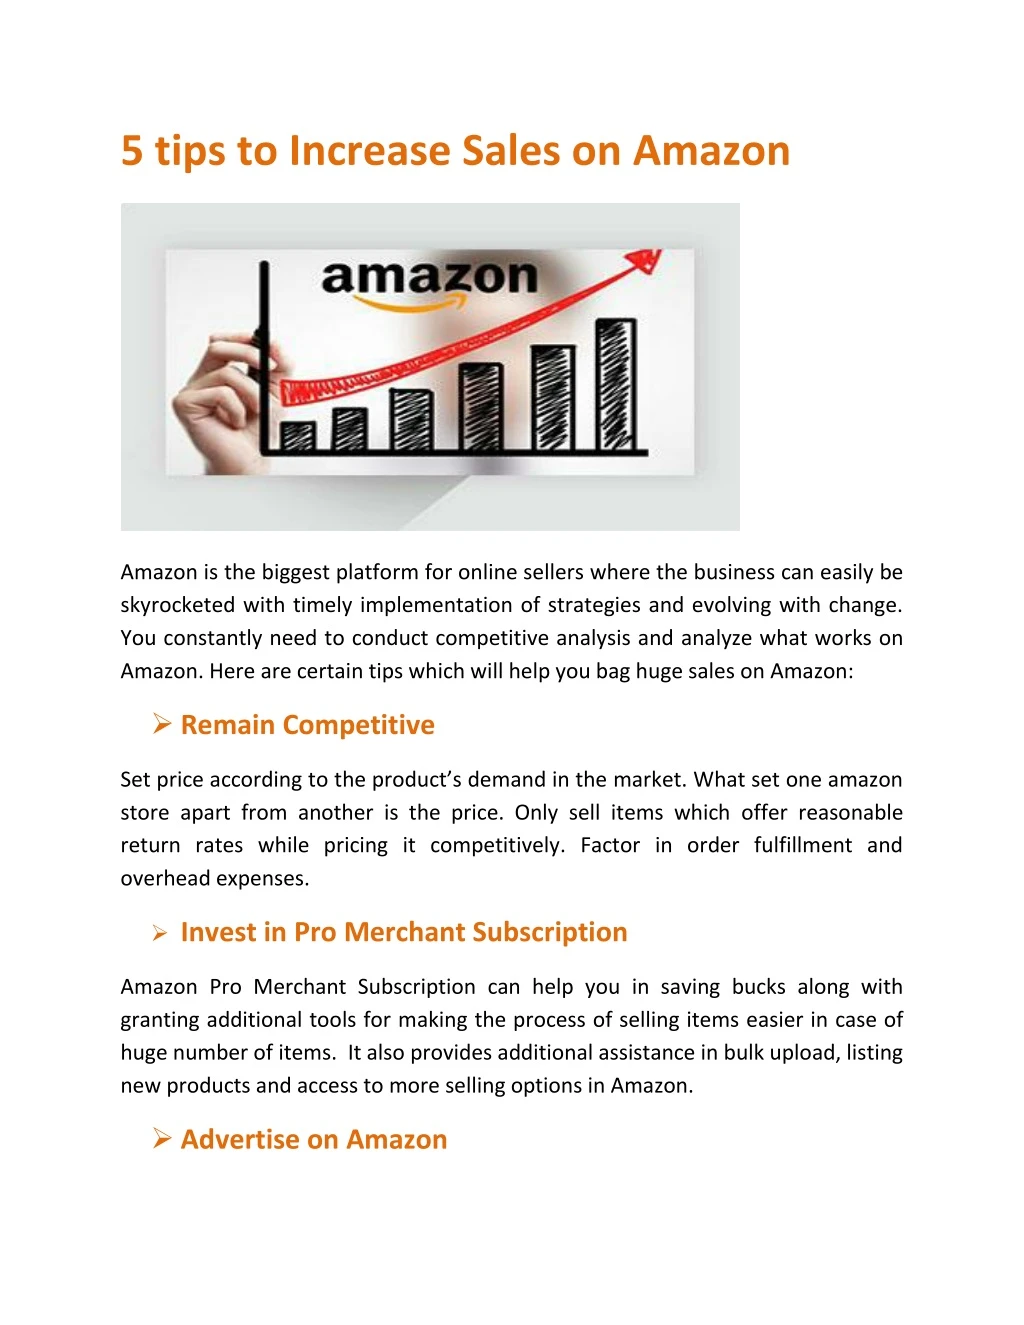 5 tips to increase sales on amazon